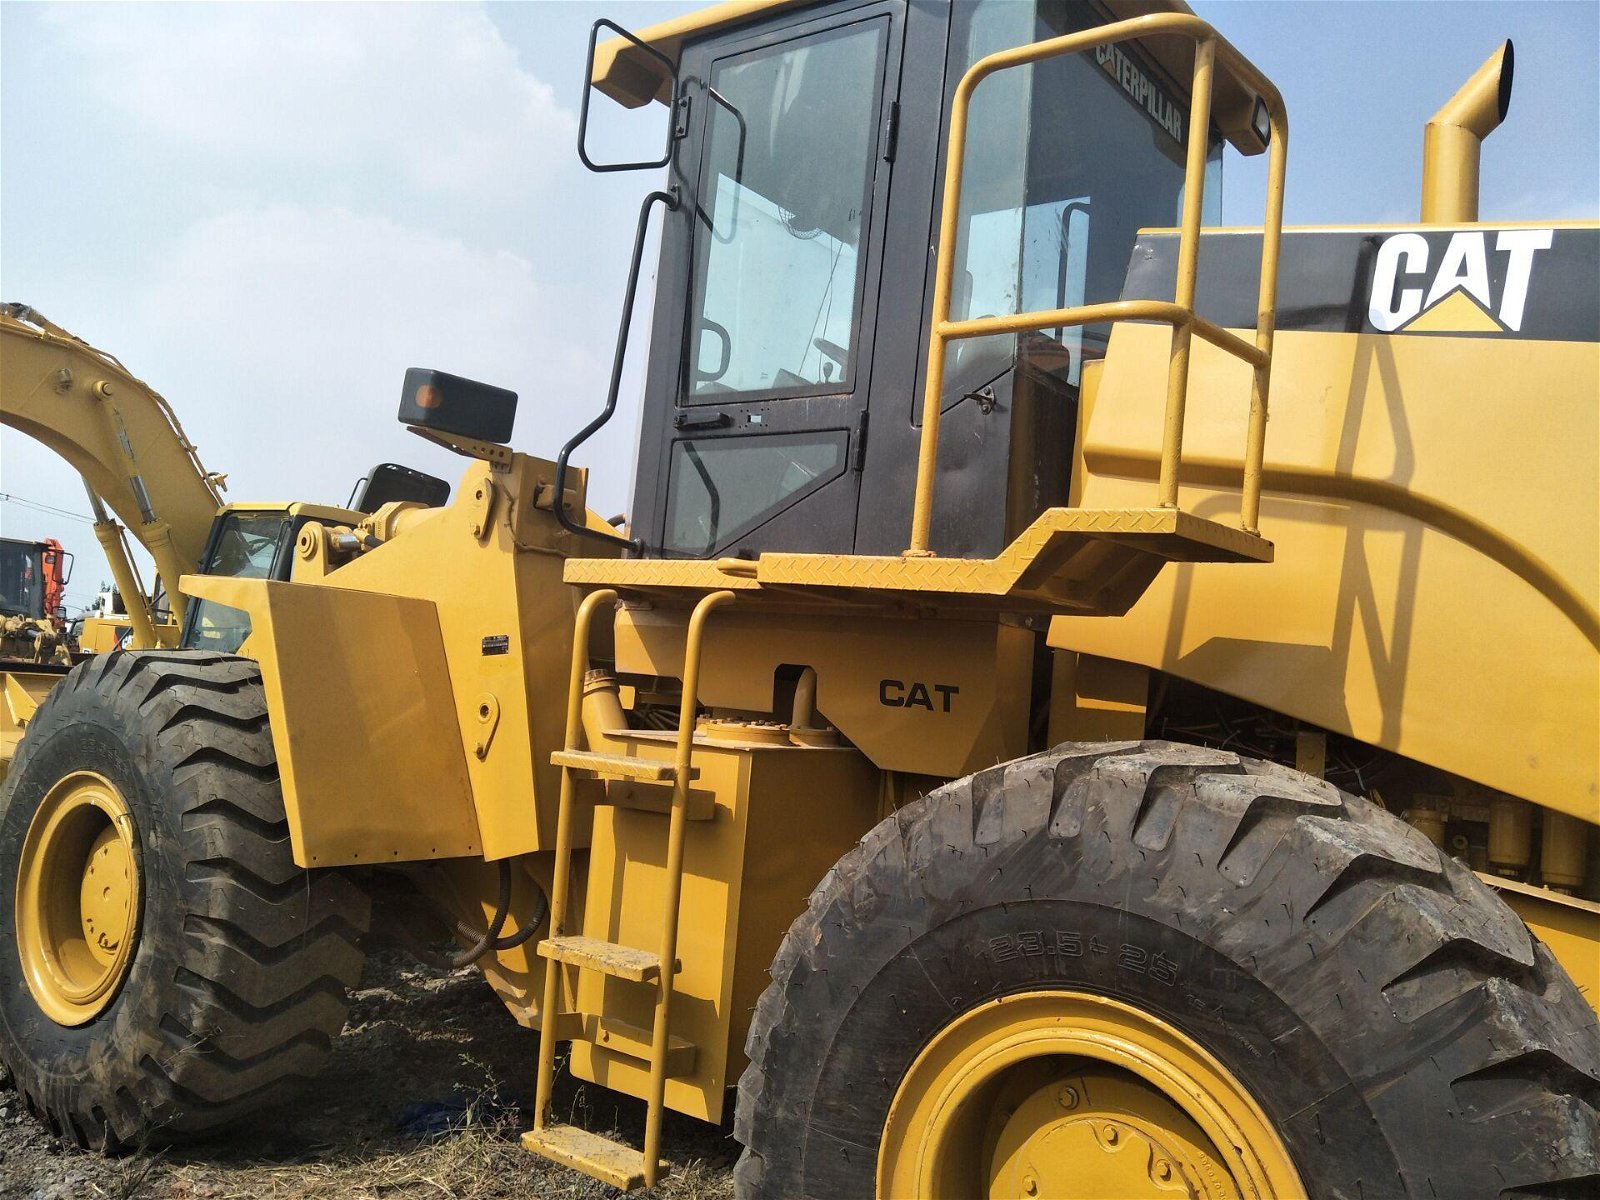 Used 966H Japanese Wheel Loader, Seconhand Cheap 5 ton Wheel Loader For Sale 5